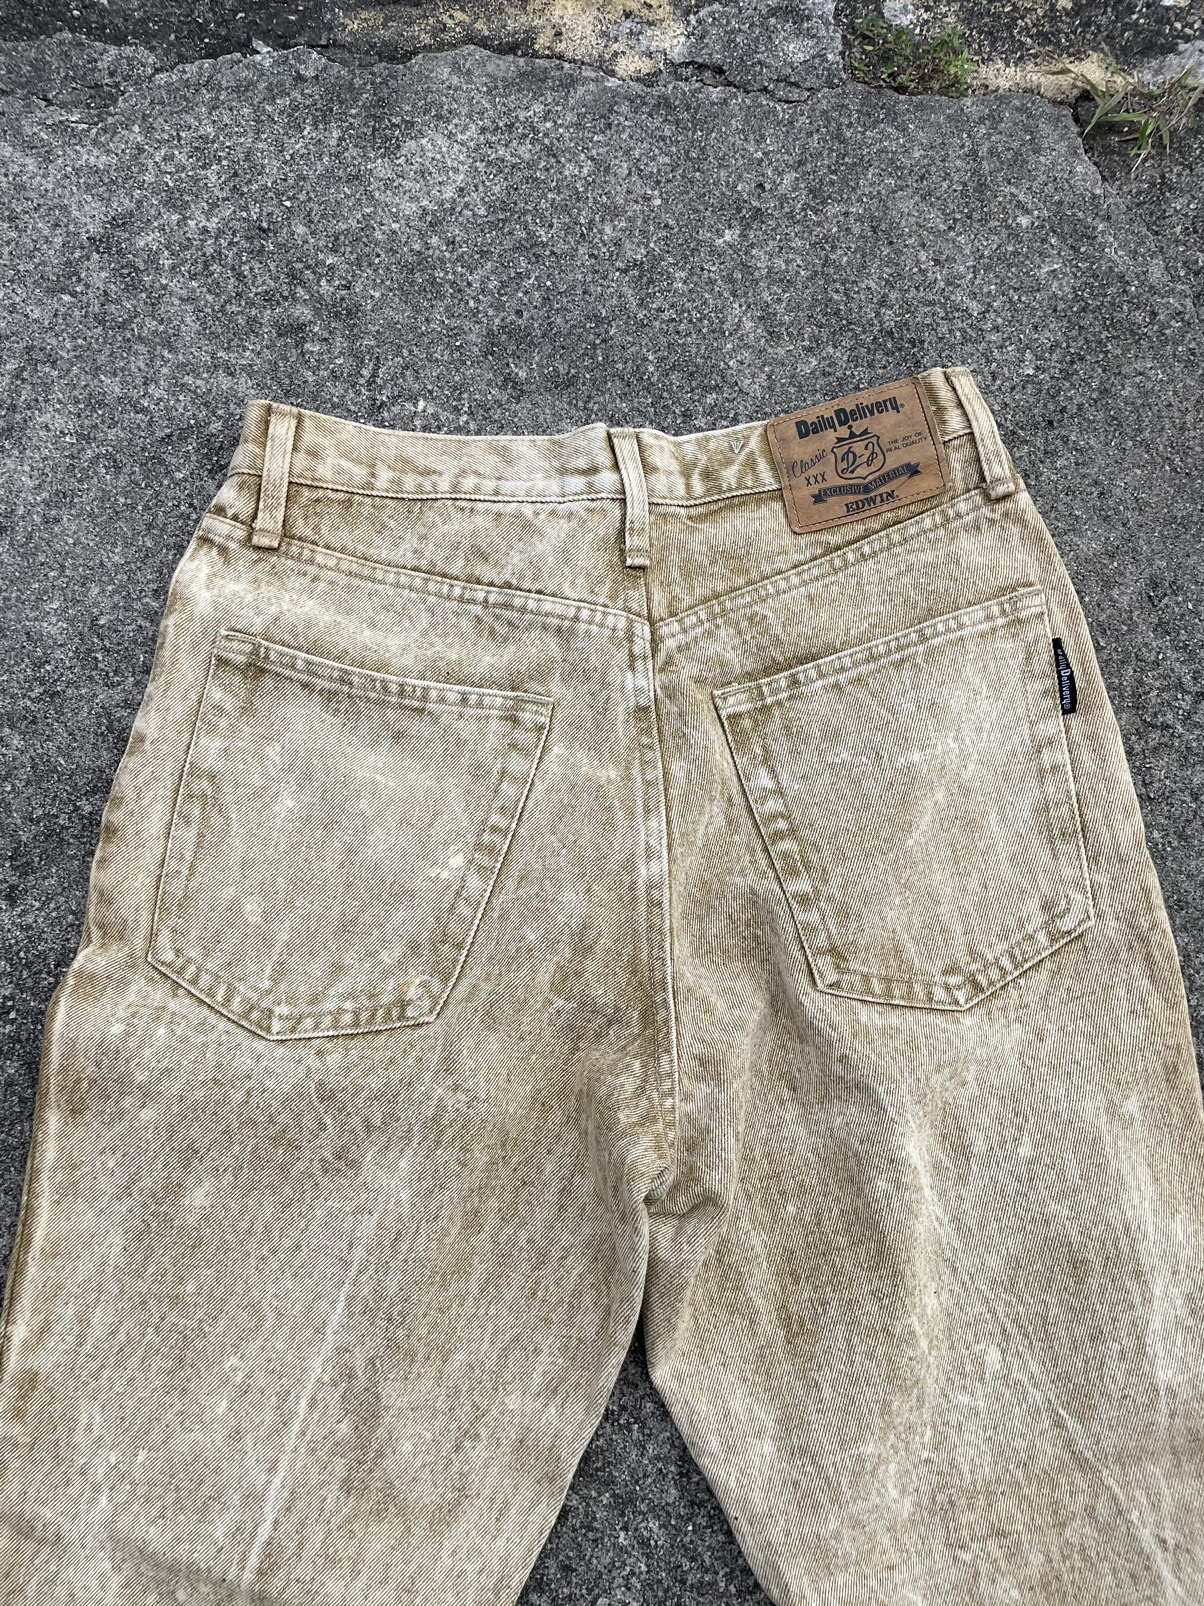 Edwin - Vintage Daily Company Classic by Edwin Jeans - 9